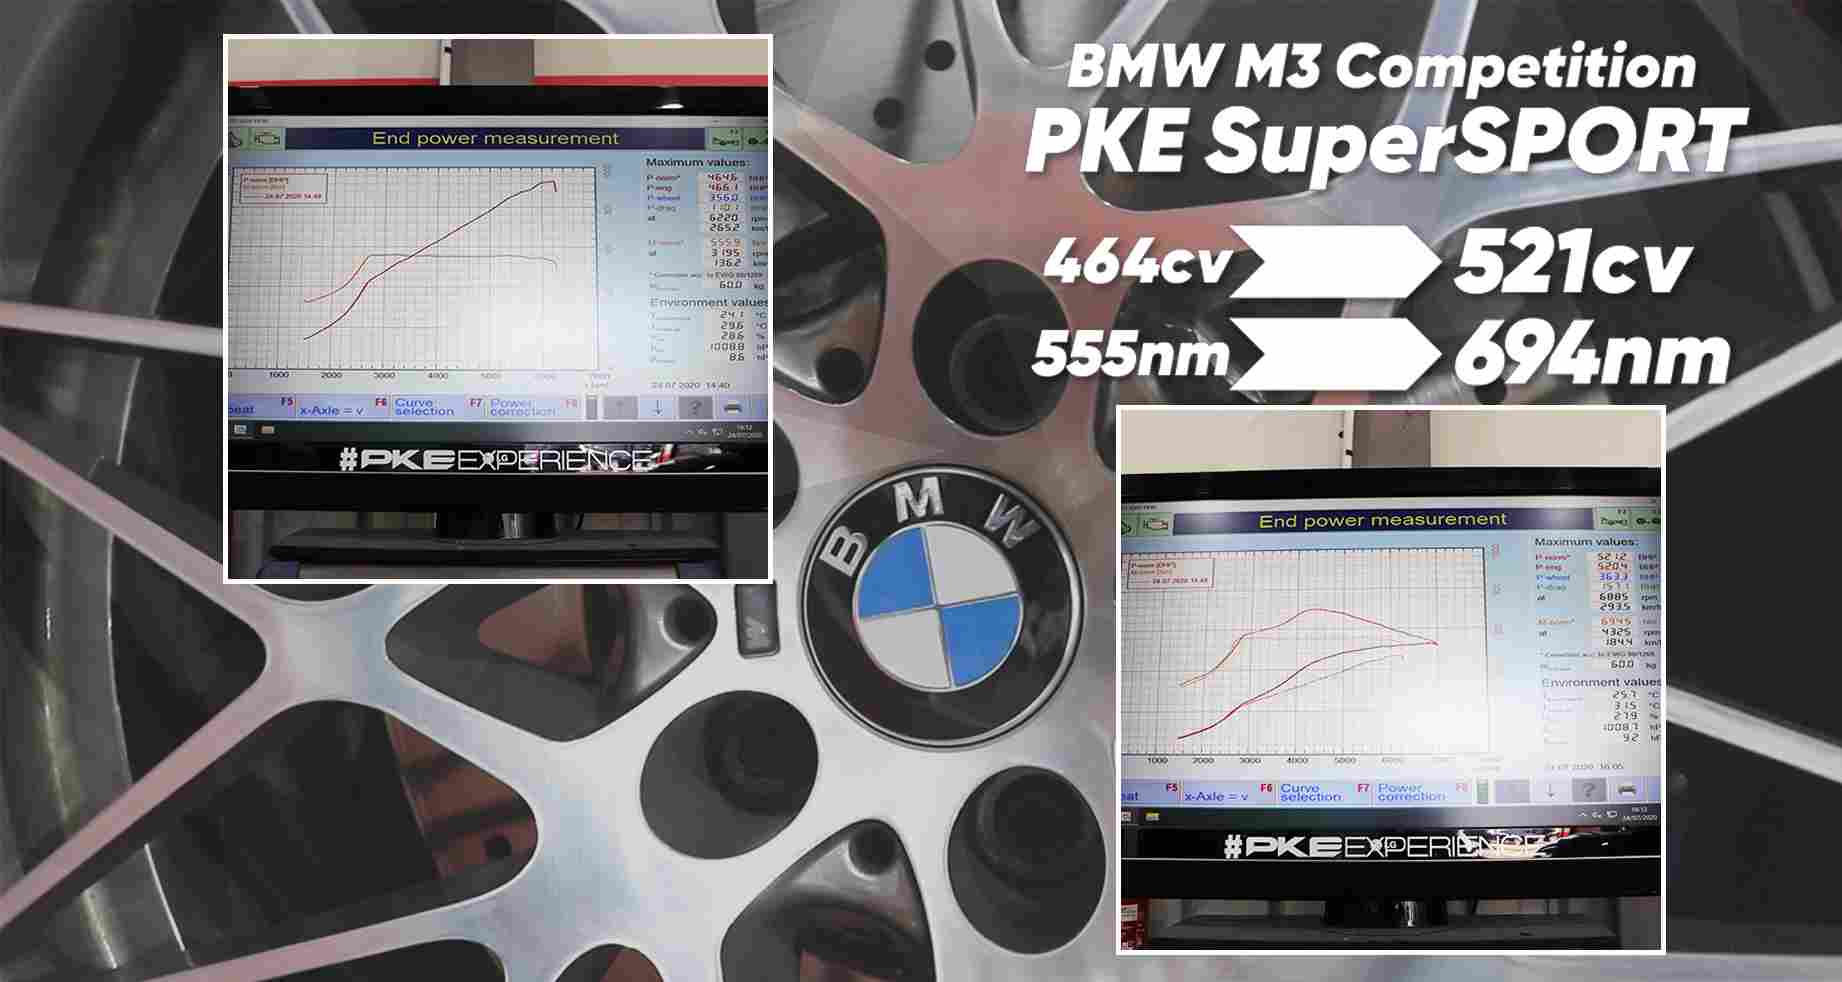 PKE SuperSPORT - BMW M3 Competition